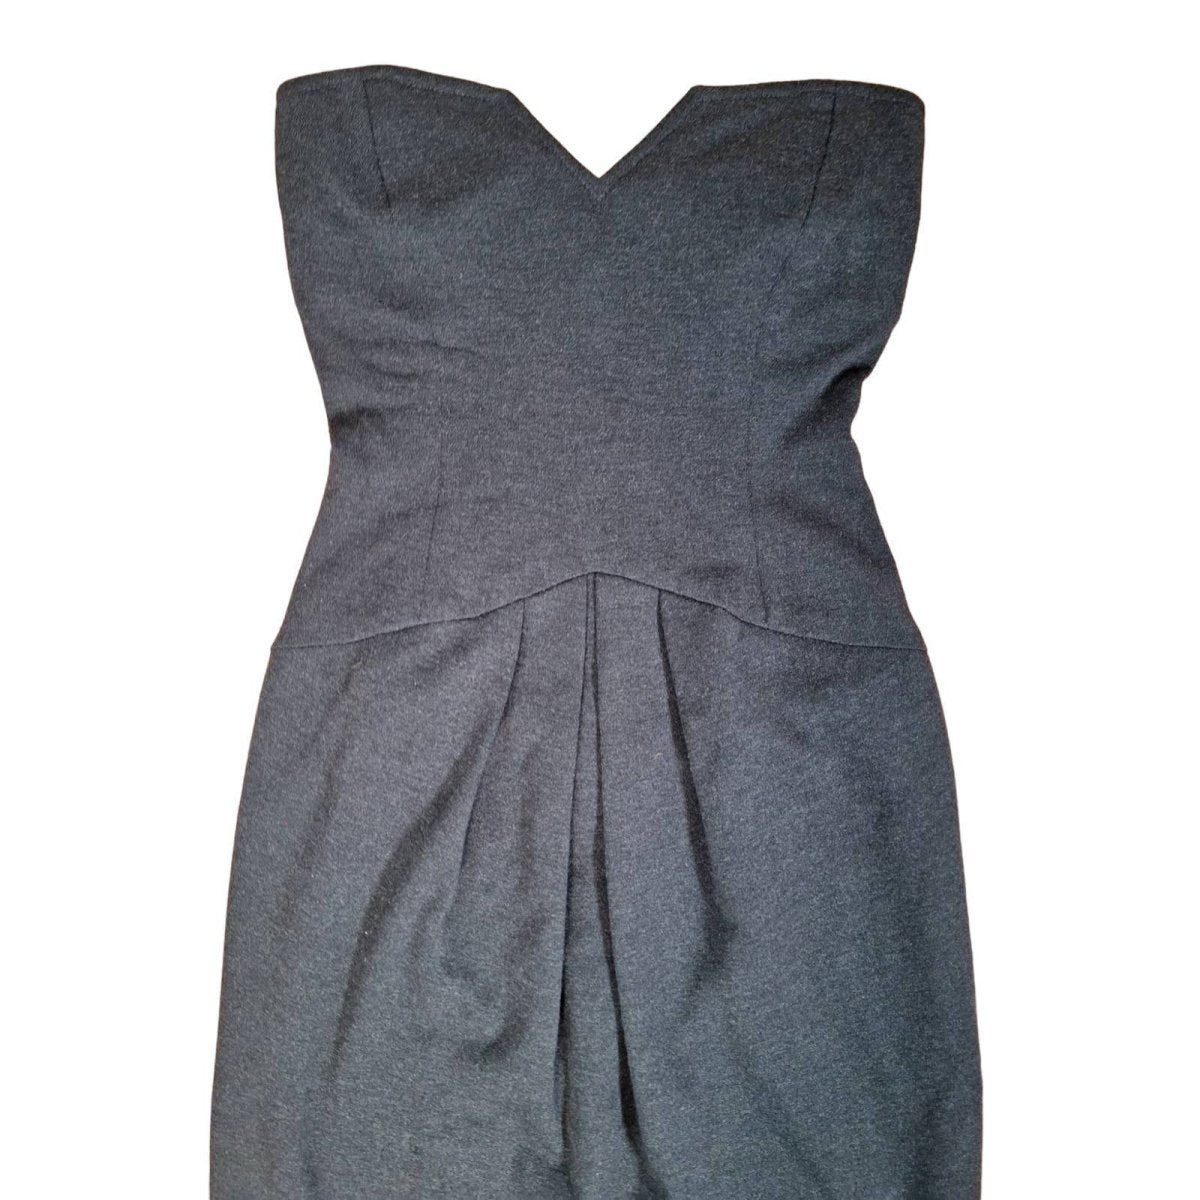 Vintage 80s Wool Charcoal Gray Strapless Party Dress Women's Size Medium 6/8 - themallvintage The Mall Vintage